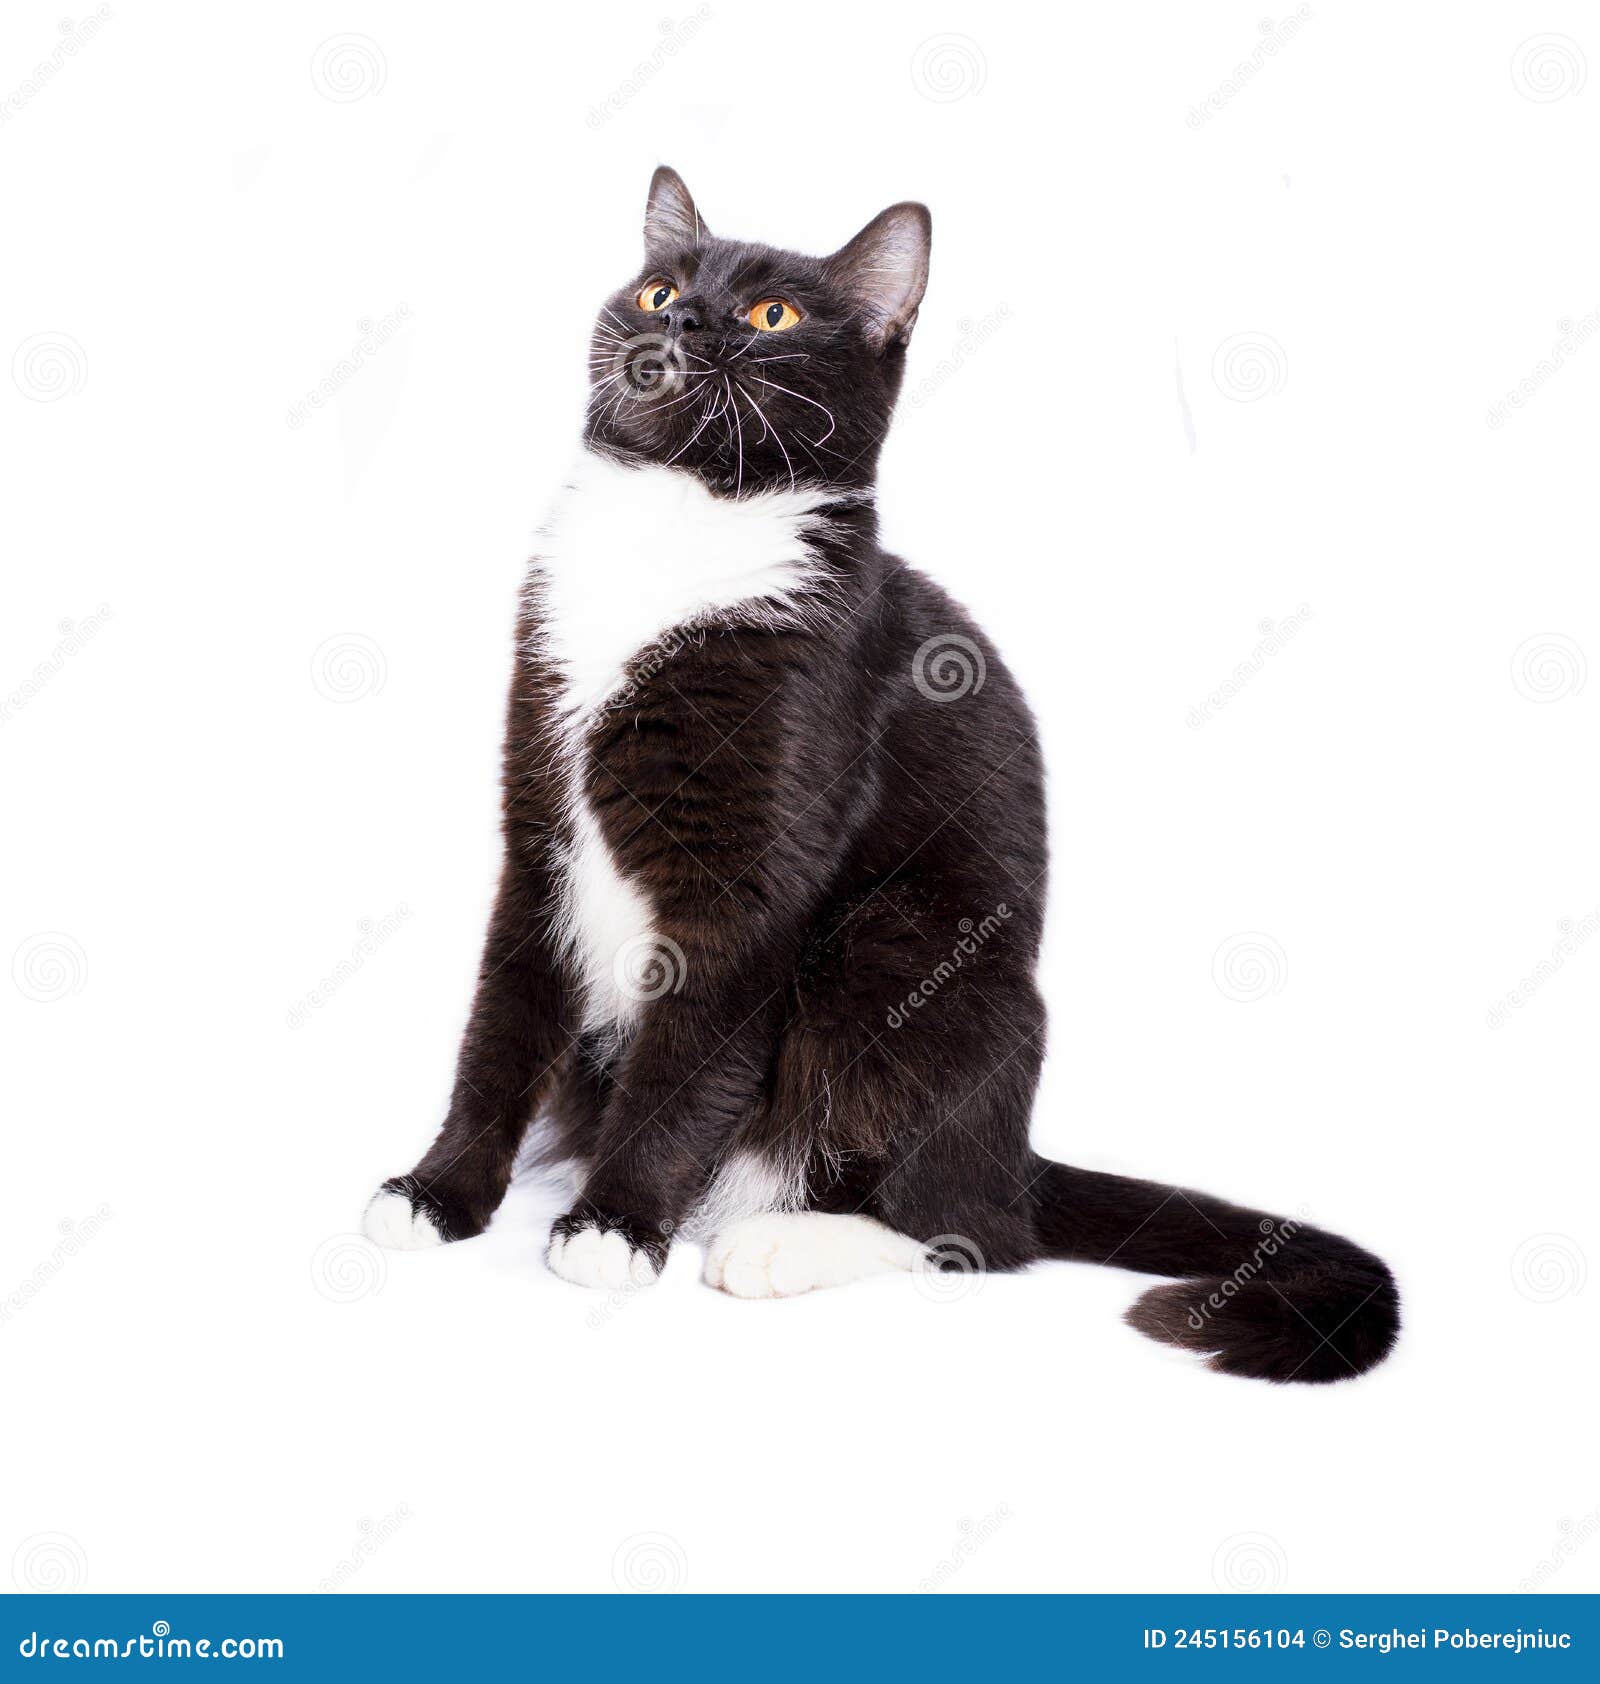 scottish straight cat black bicolor color sitting on a white background,  image